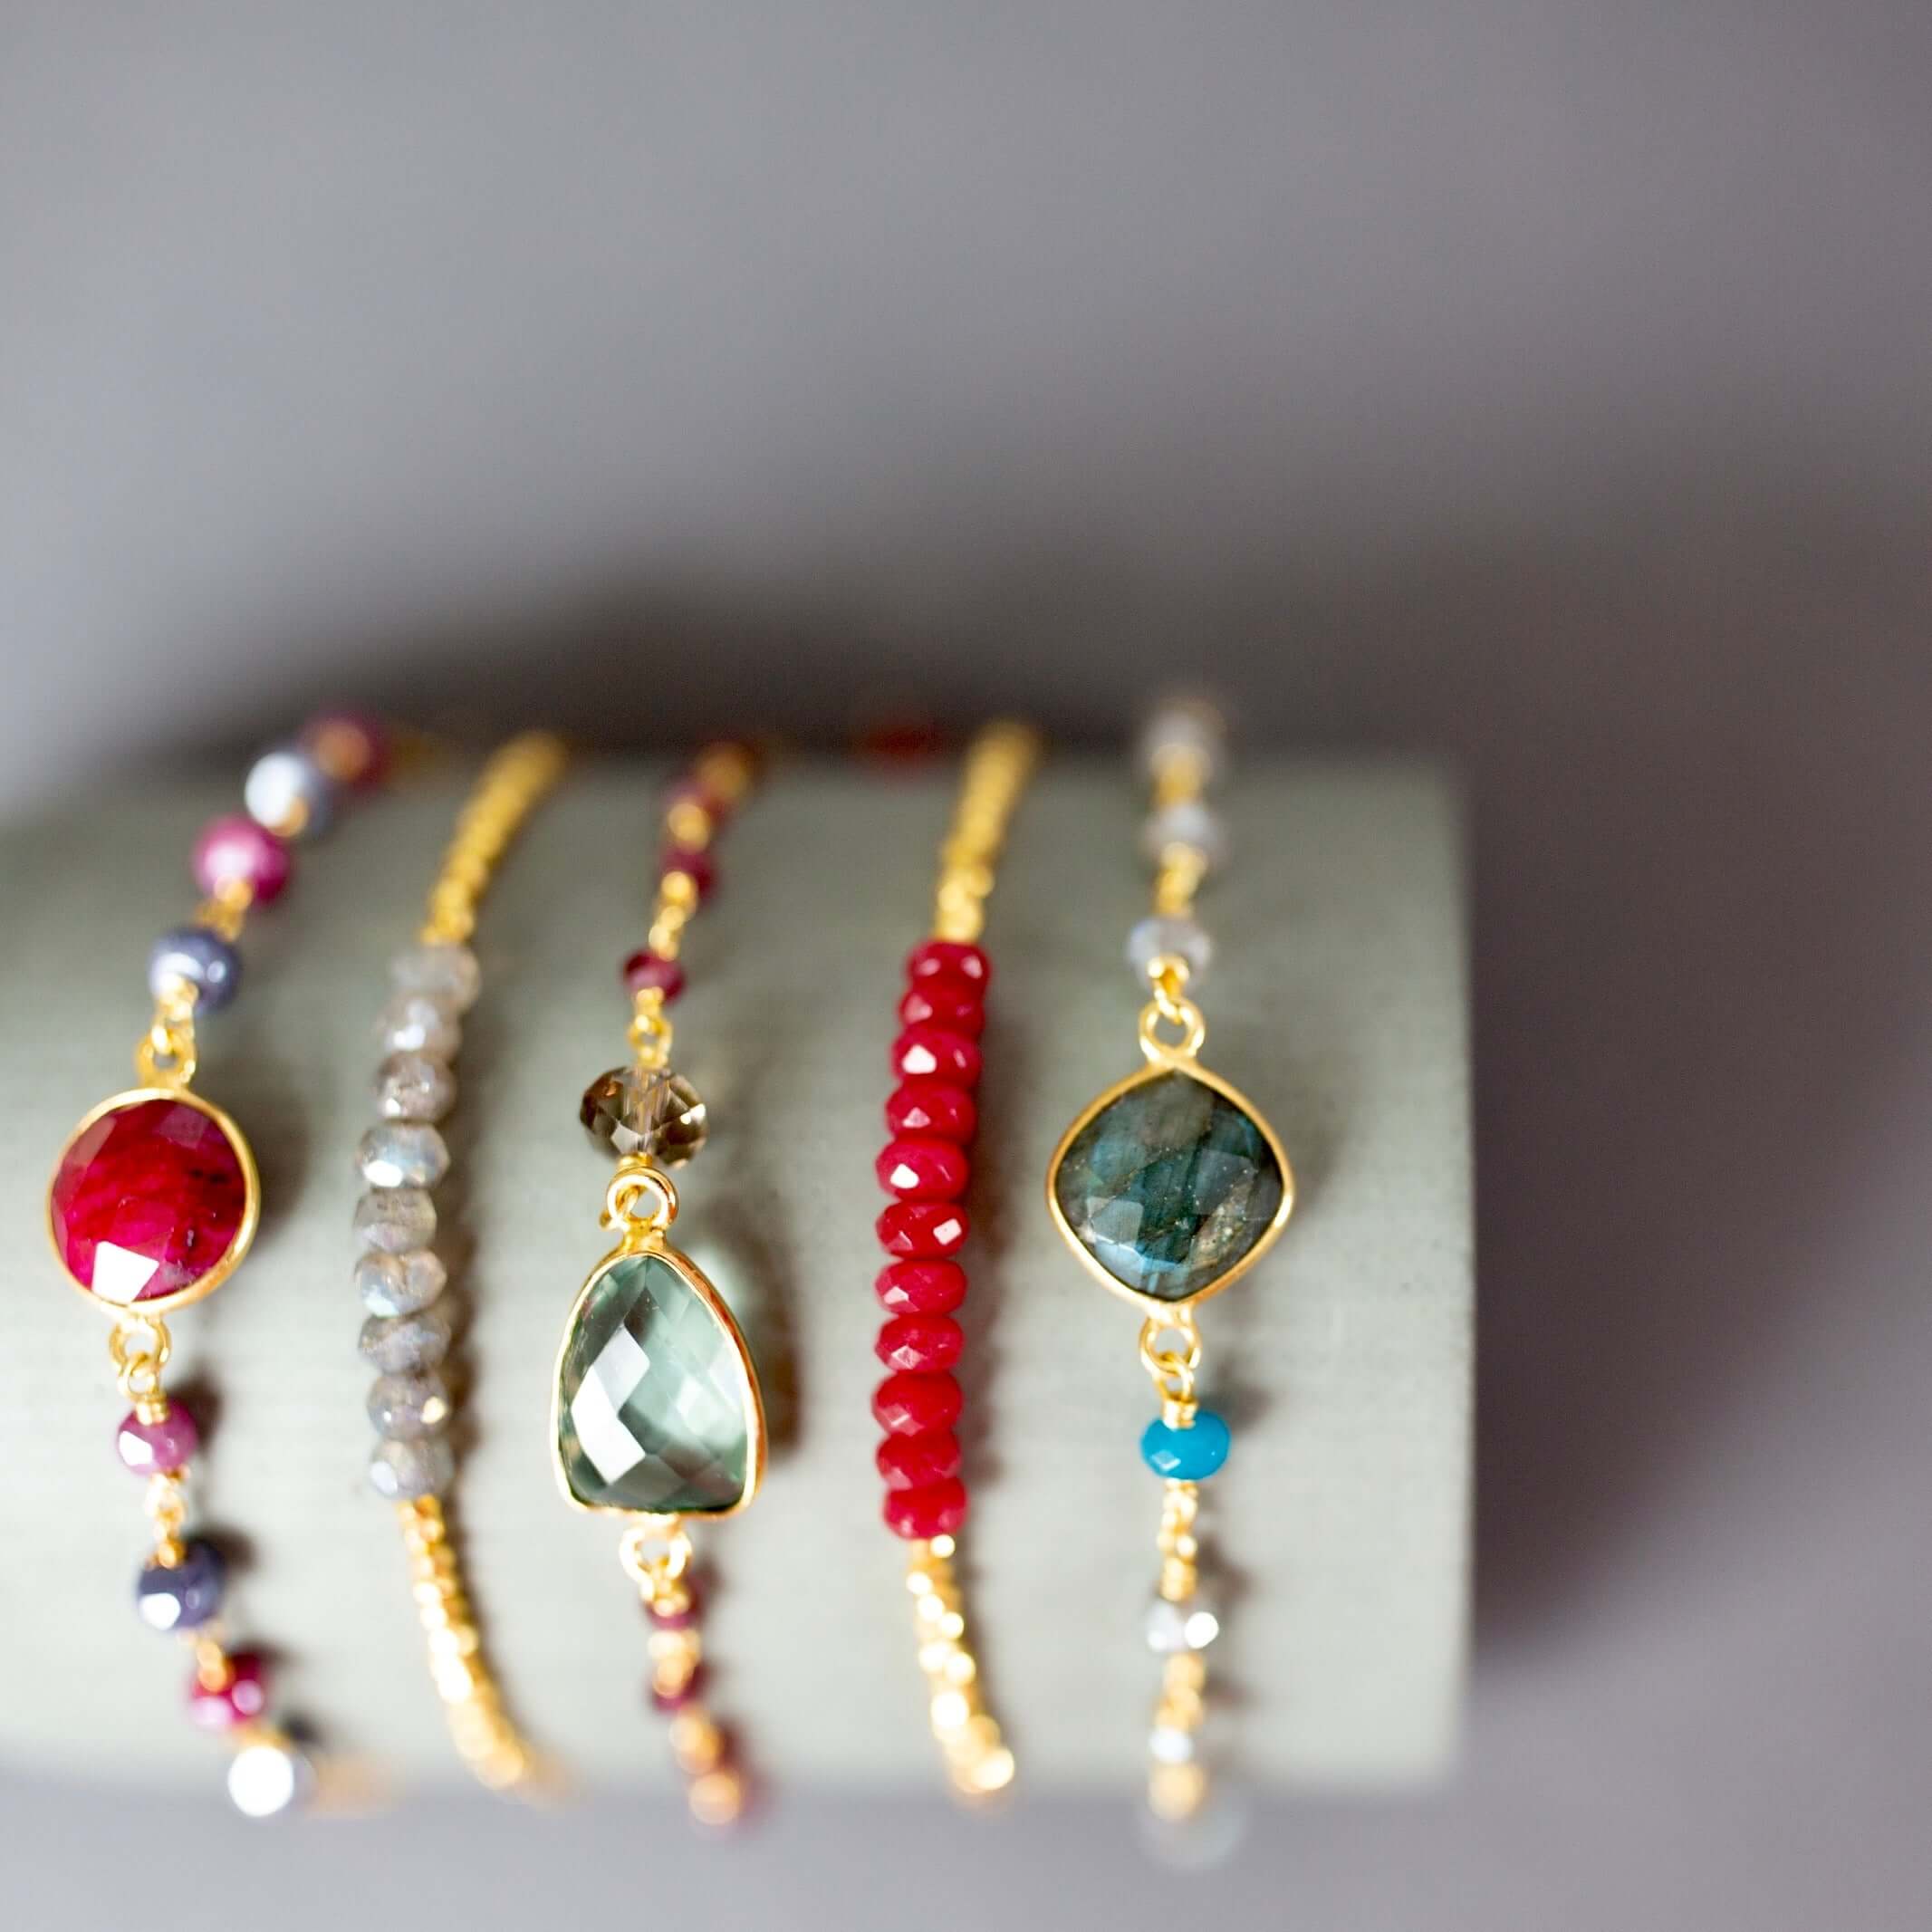 Colorful Gold plated Adjustable Bracelets with Green Amethyst Bezel and Tiny Gemstone Accents.